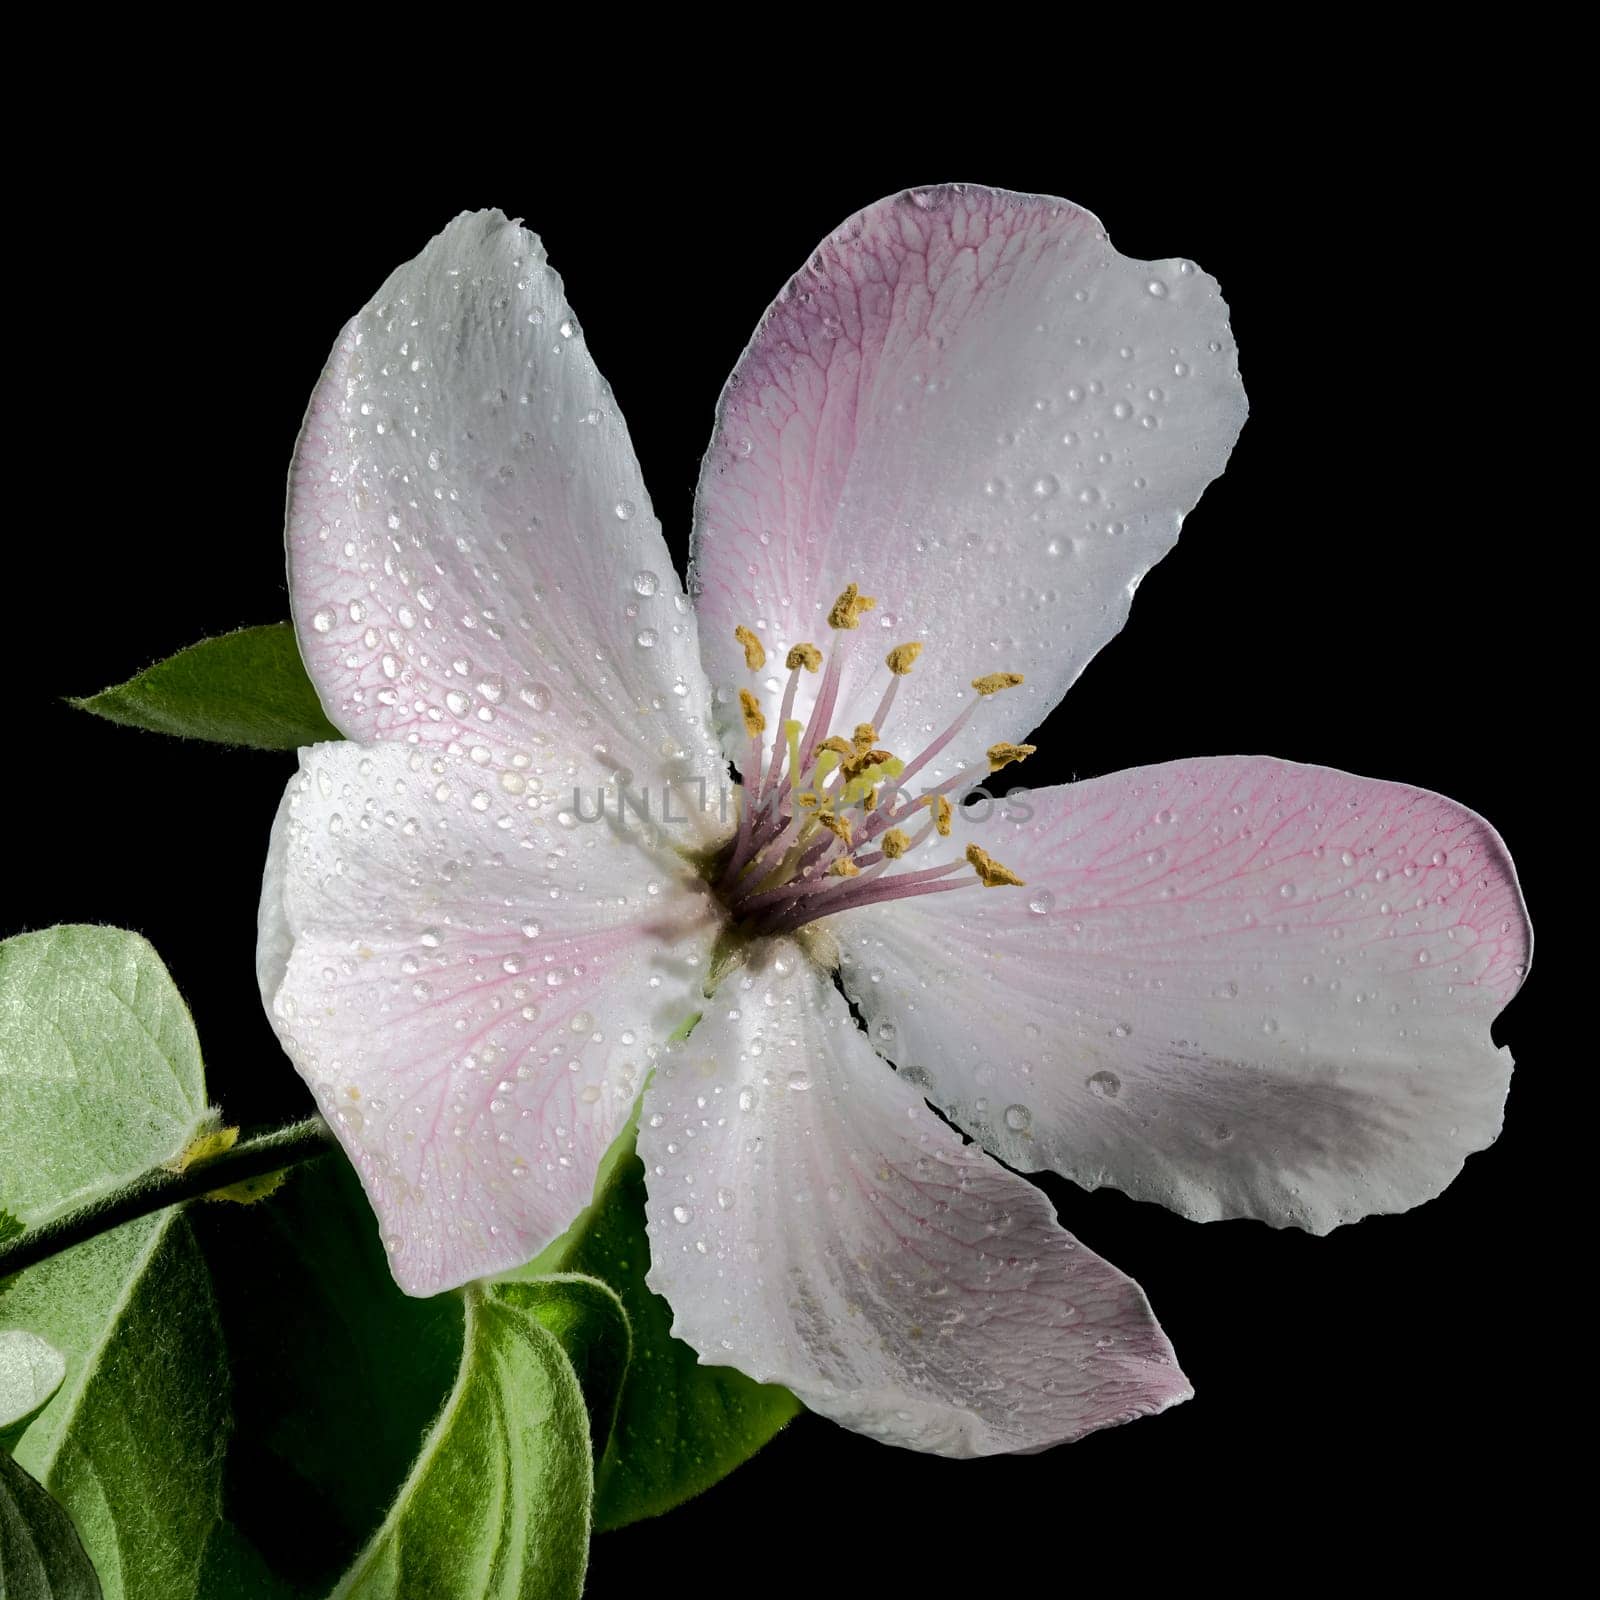 Beautiful white Quince tree flower blossom isolated on a black background. Flower head close-up.